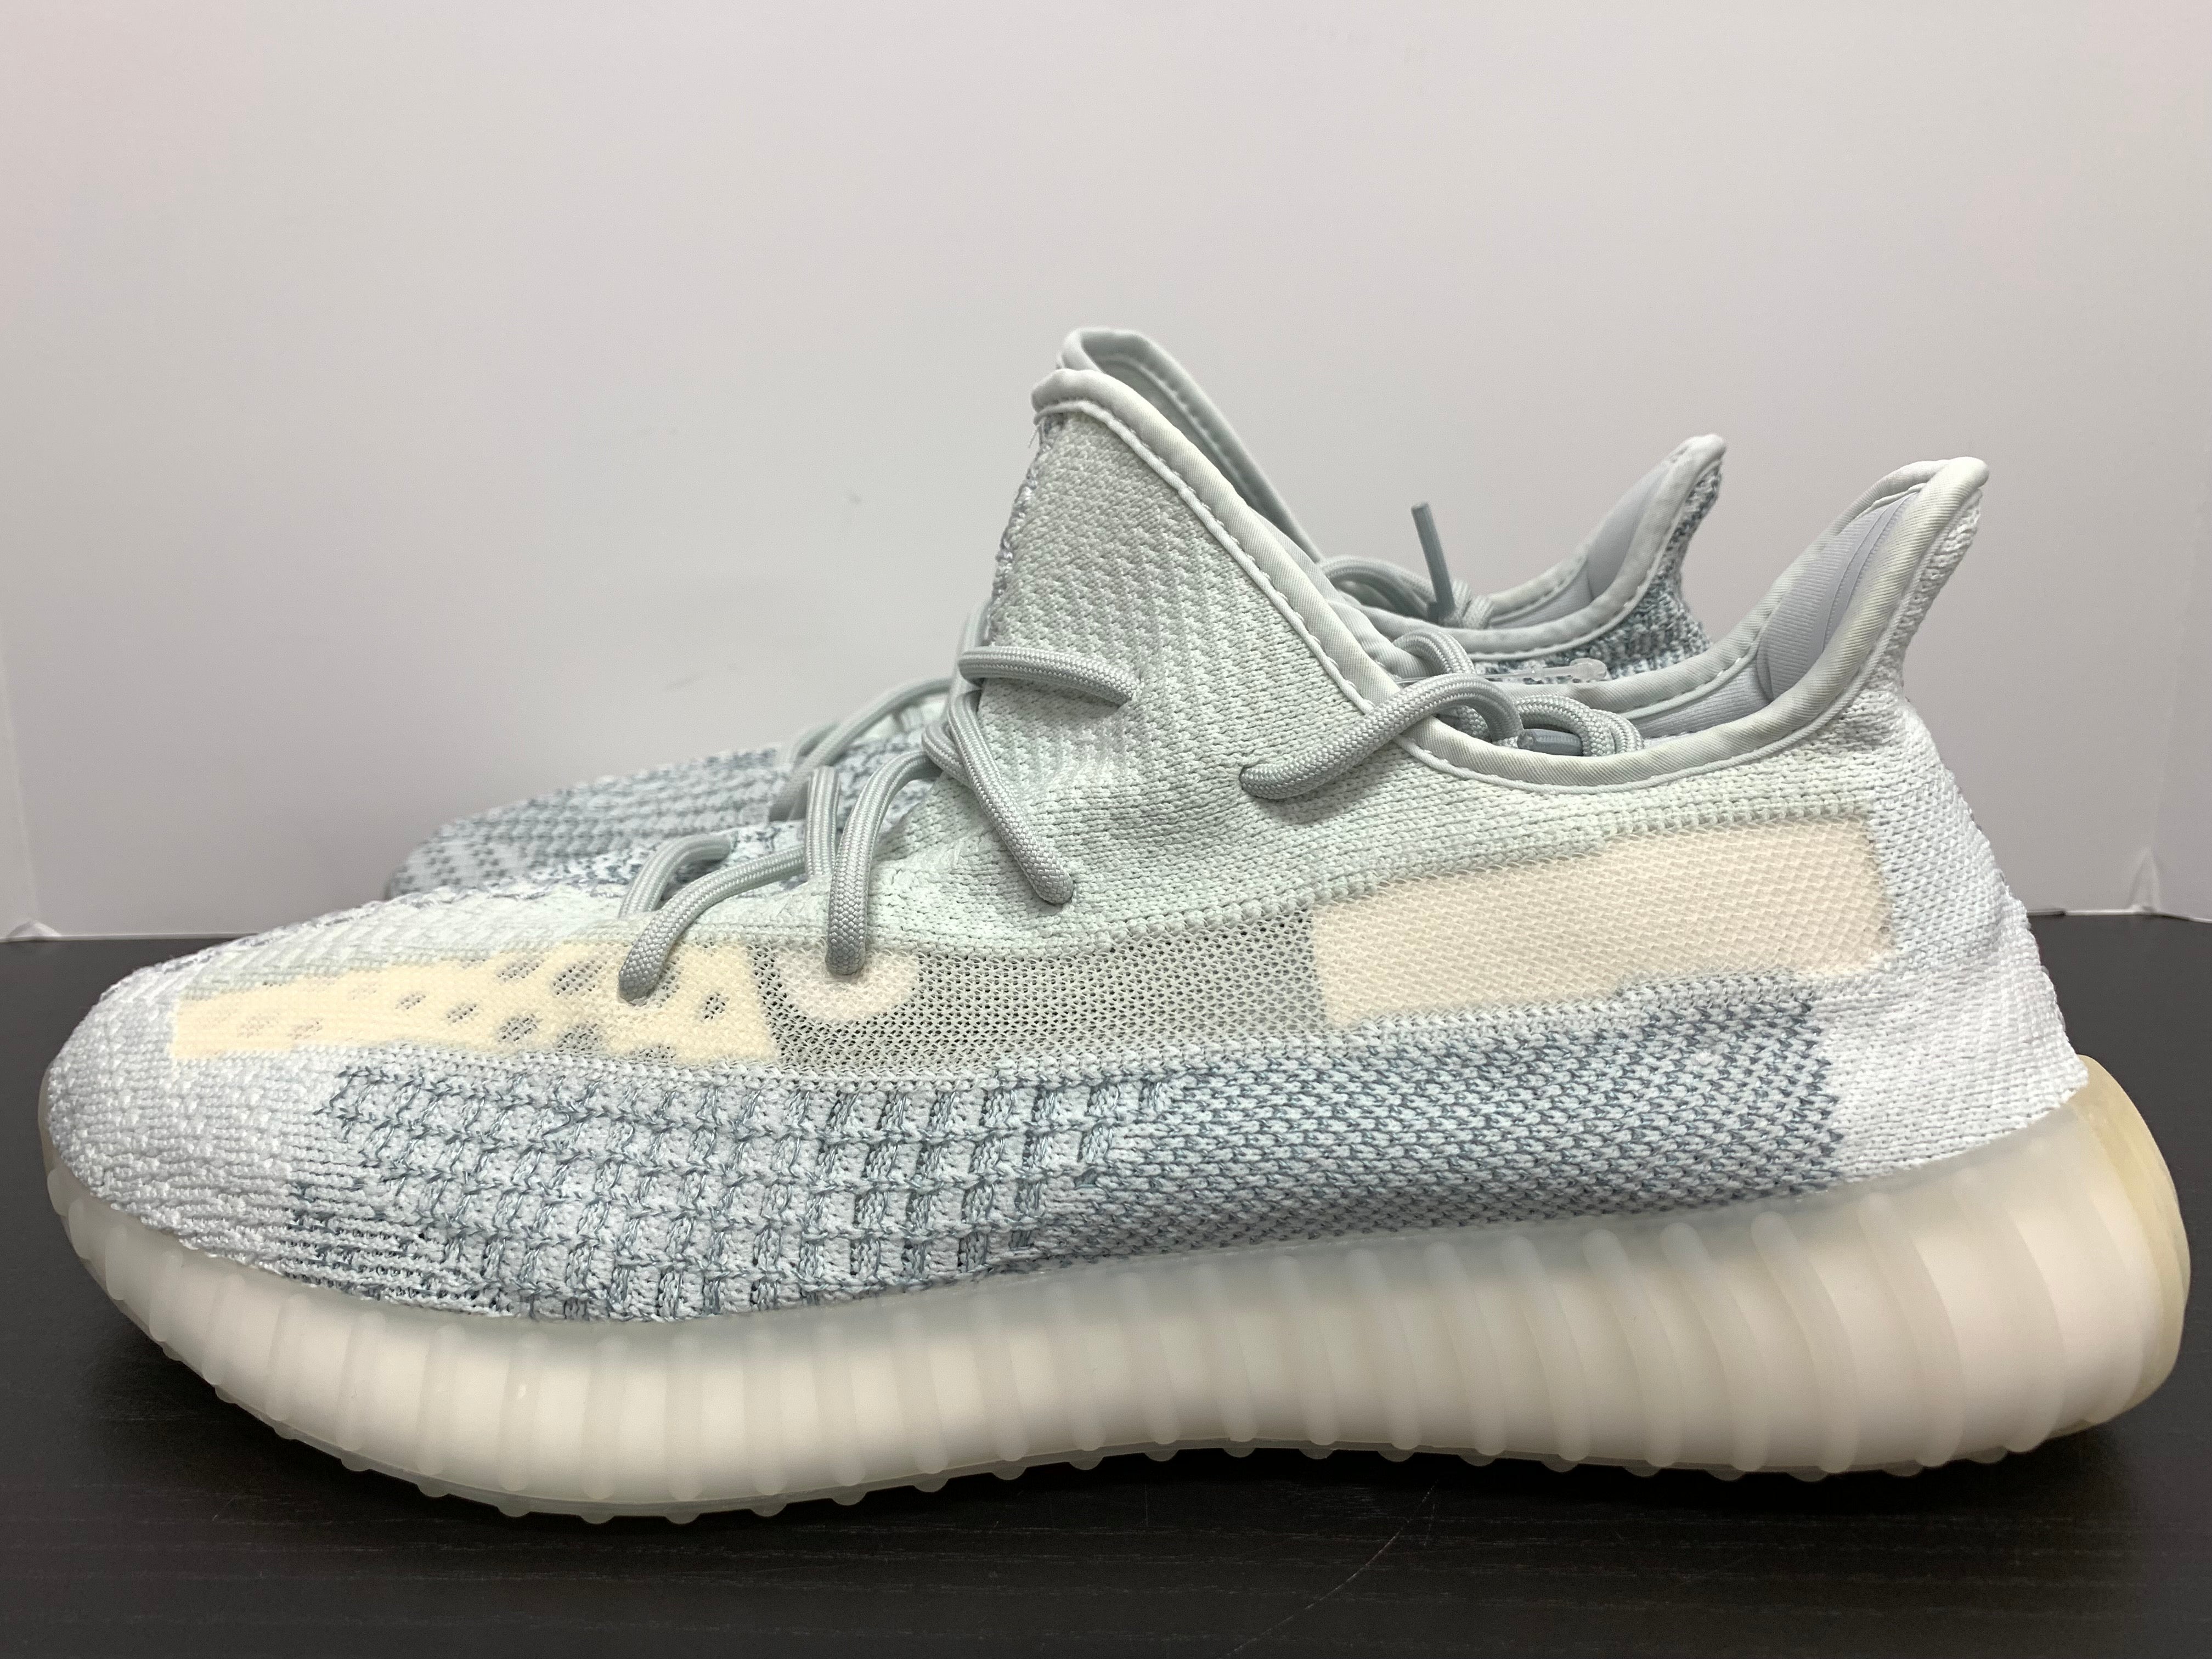 Adidas Yeezy Boost 350 V2 Cloud White Reflective Chillykicks